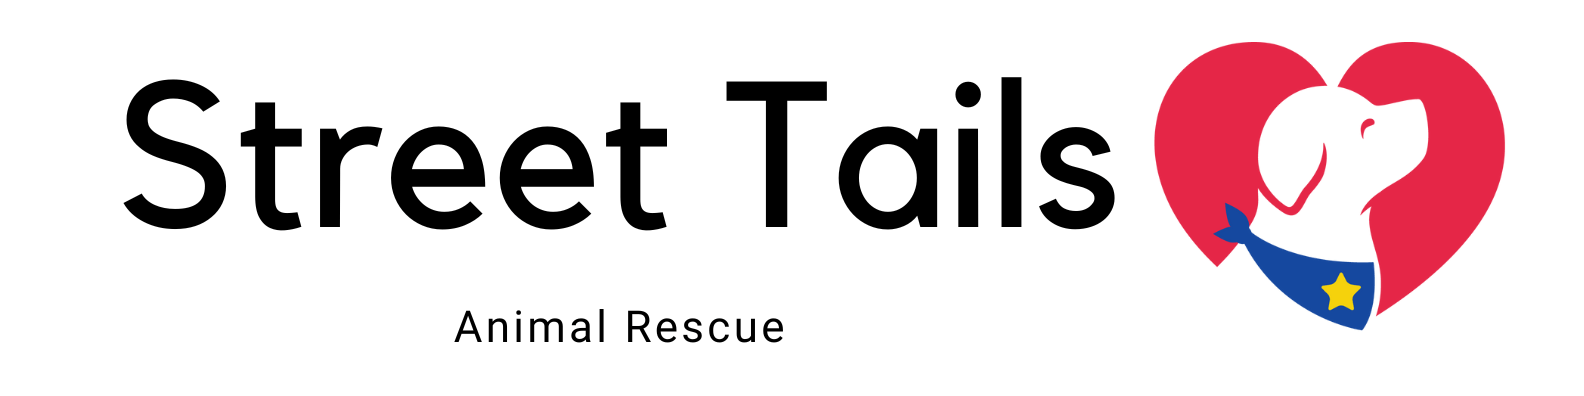 Street Tails Animal Rescue